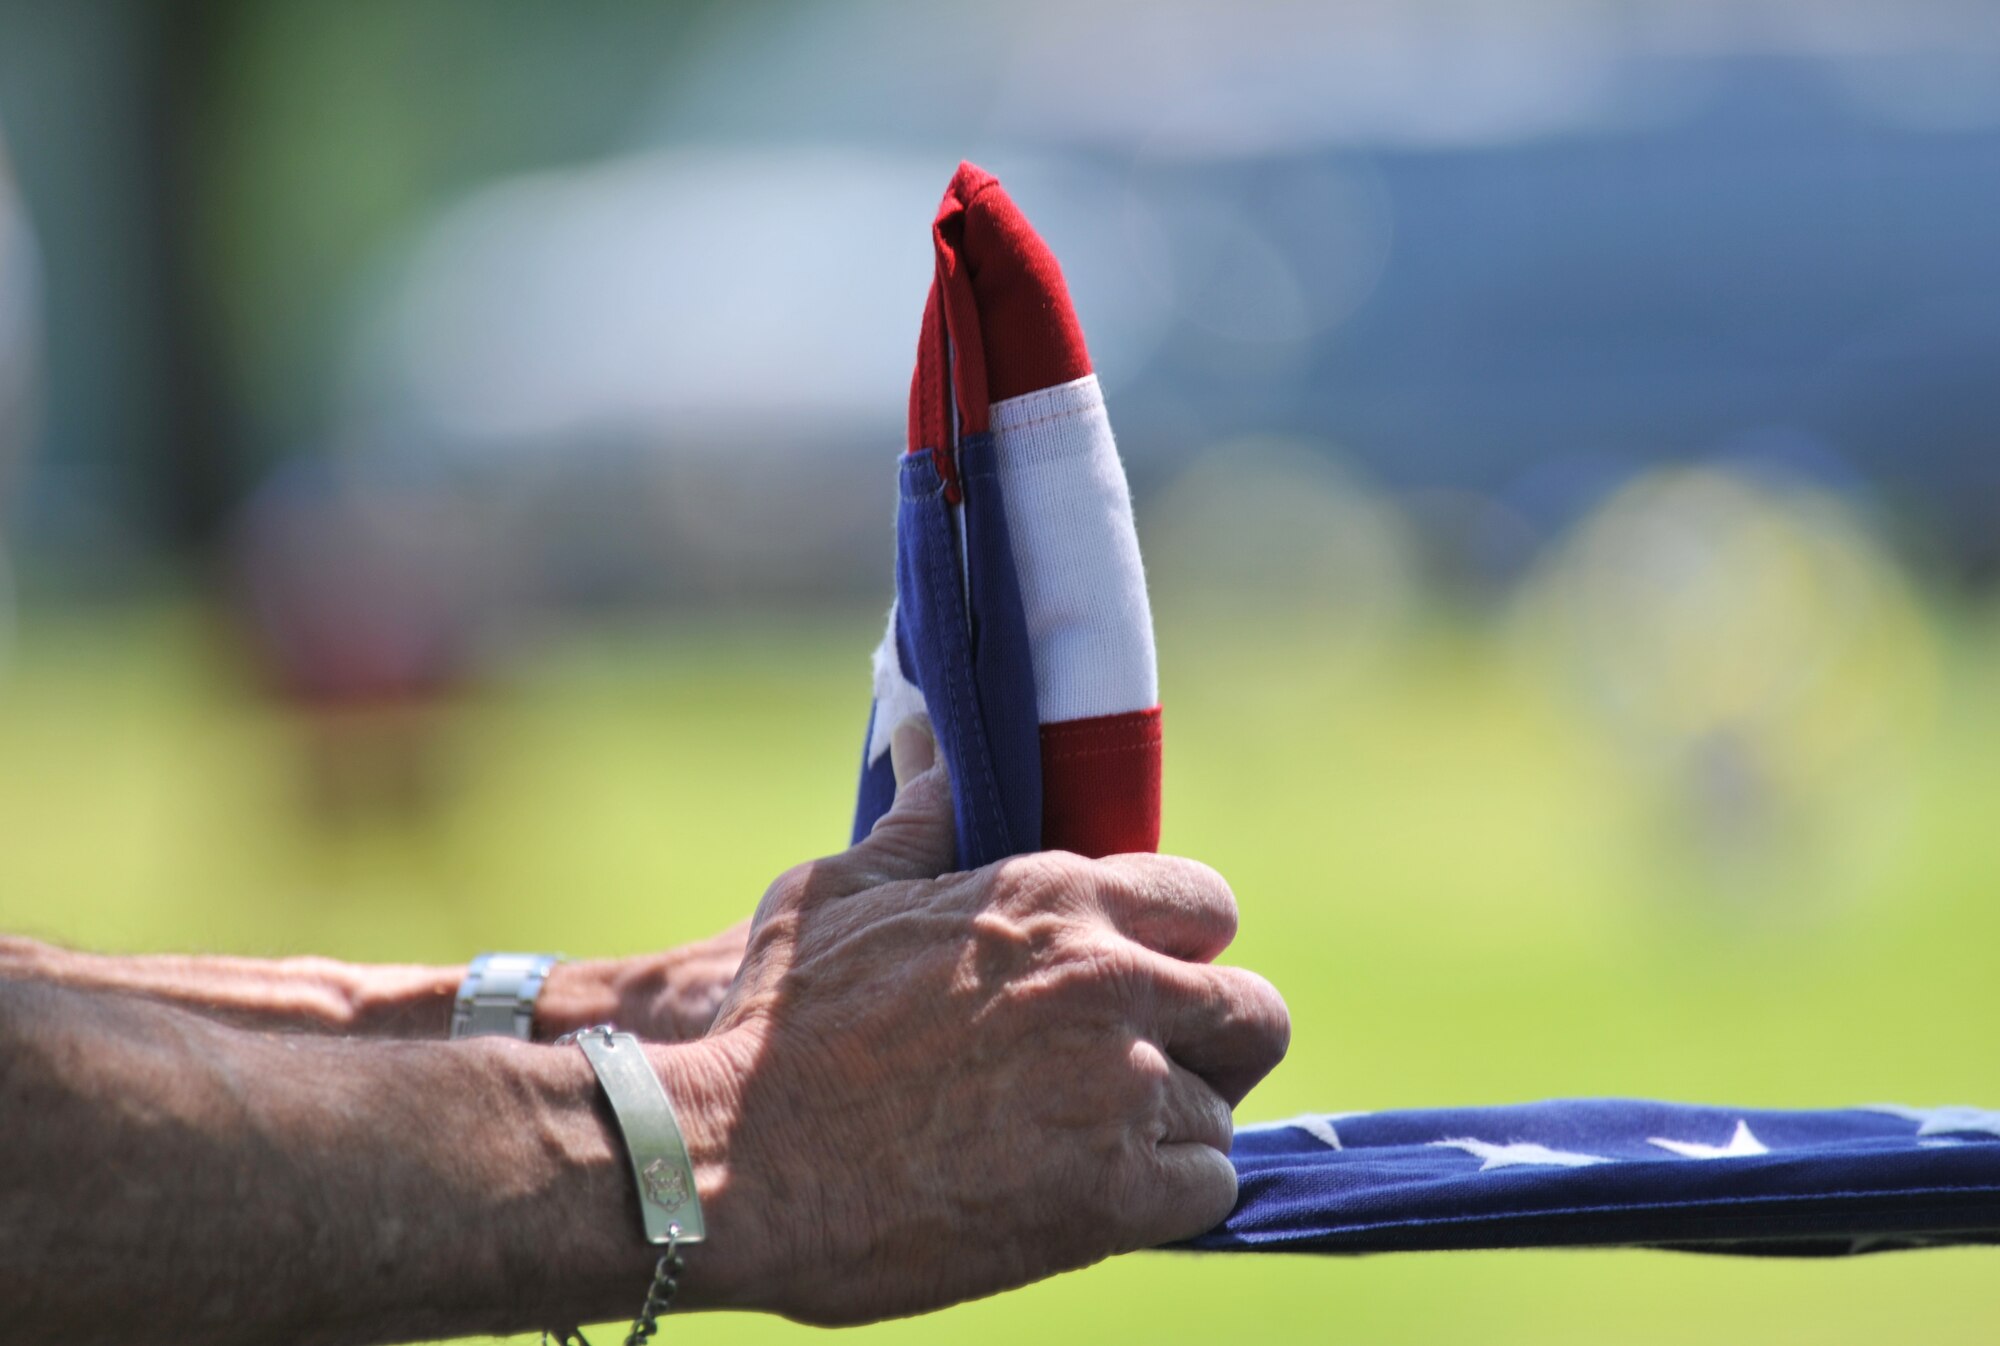 The flag from 2nd Lt. George Whiteman’s annual wreath-laying ceremony is folded by local Veterans of Foreign Wars May 18, 2013, in Sedalia, Mo. Nearby Whiteman Air Force Base was named in the young lieutenant’s honor in 1955 after he died during World War II. (U.S. Air Force photo by Senior Airman Brigitte N. Brantley/Released)